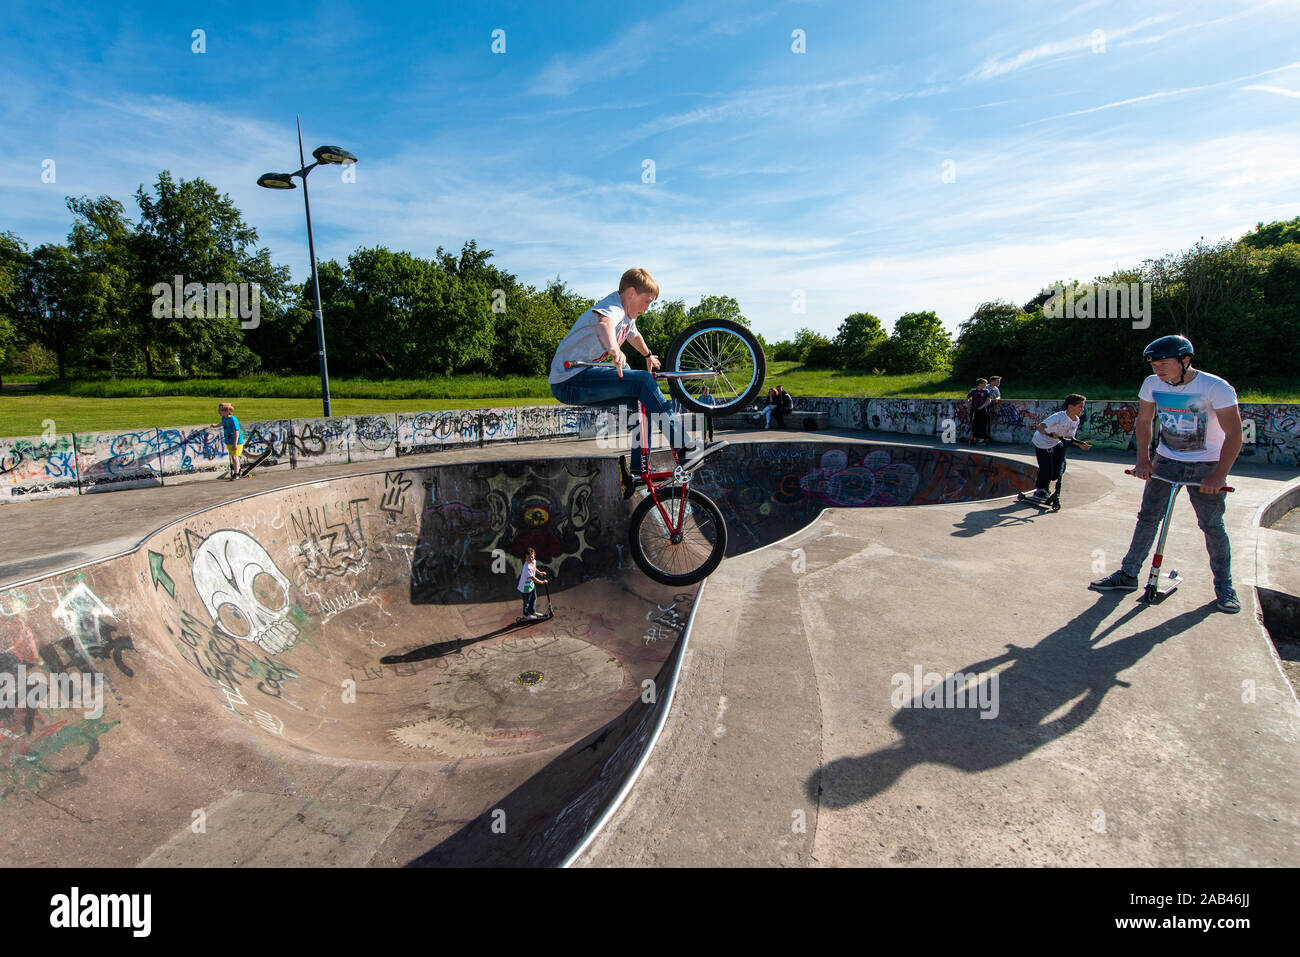 Pro, Professional BMX riders compete in a annual competition at the Stoke  on Trent skatepark, riding around the park, bowl and walls performing  tricks Stock Photo - Alamy